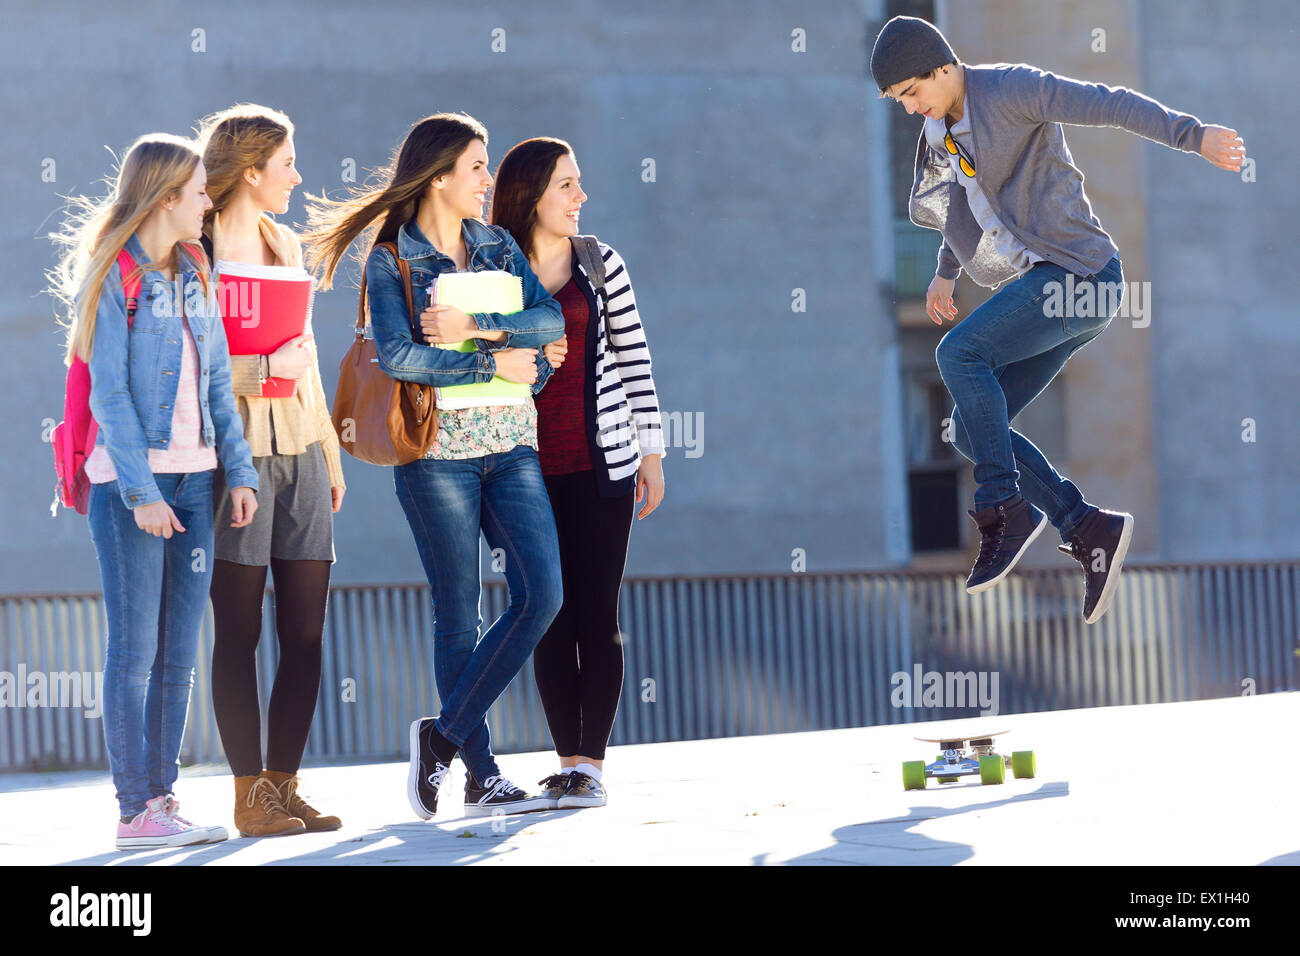 A group of Friends having fun with skate in the street after school Stock Photo